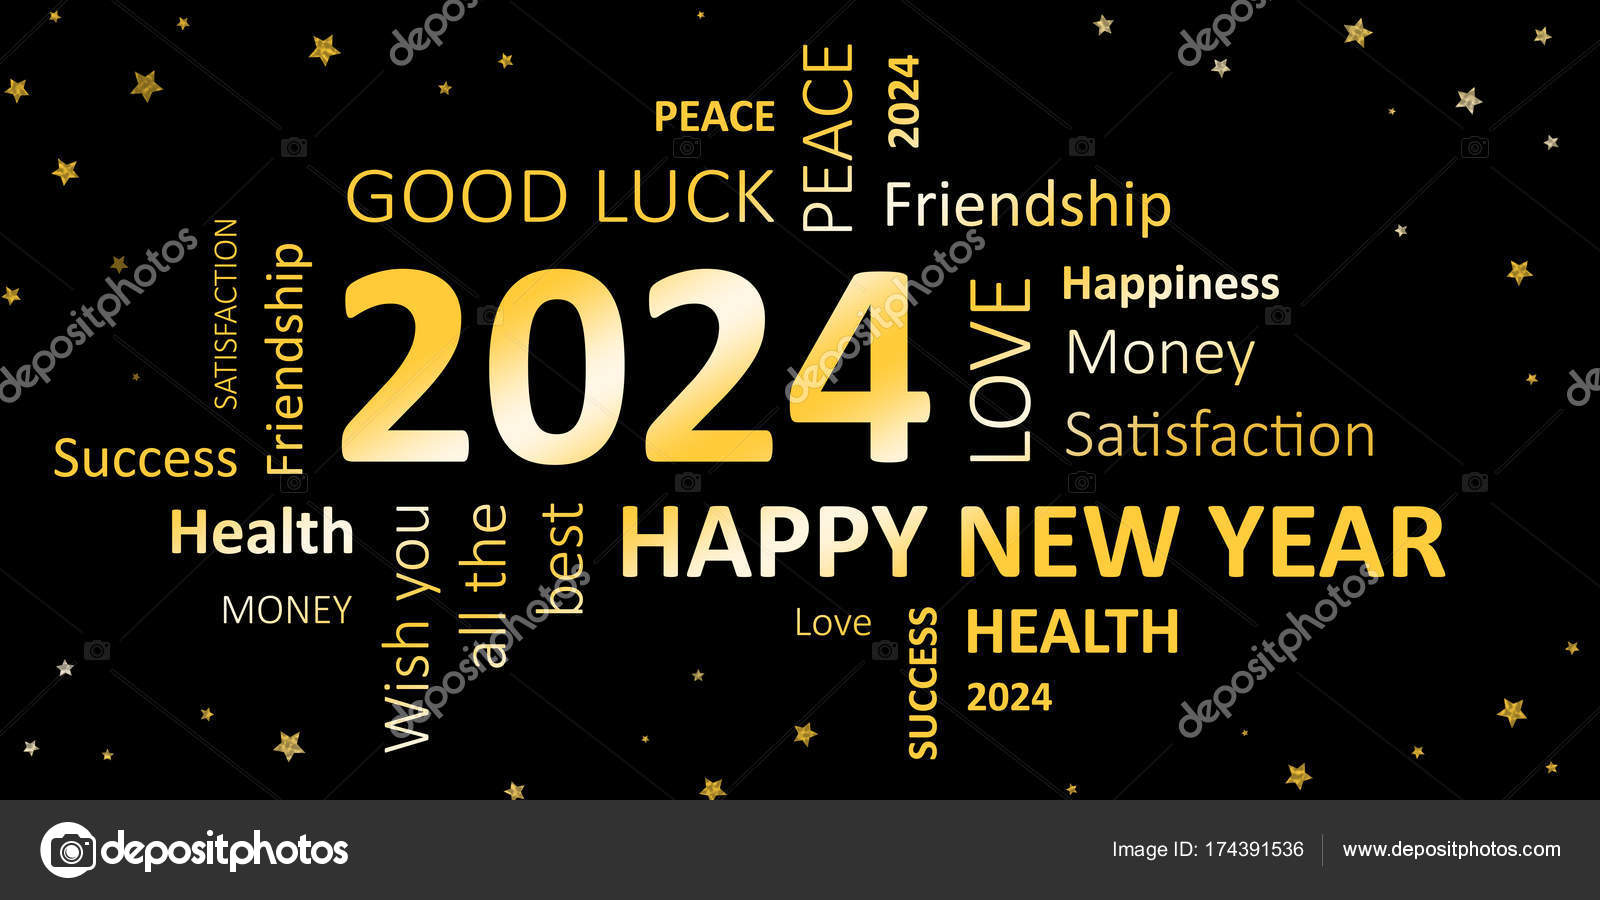 New years card Happy new year 2024 and wishes Stock Photo by ©JNaether